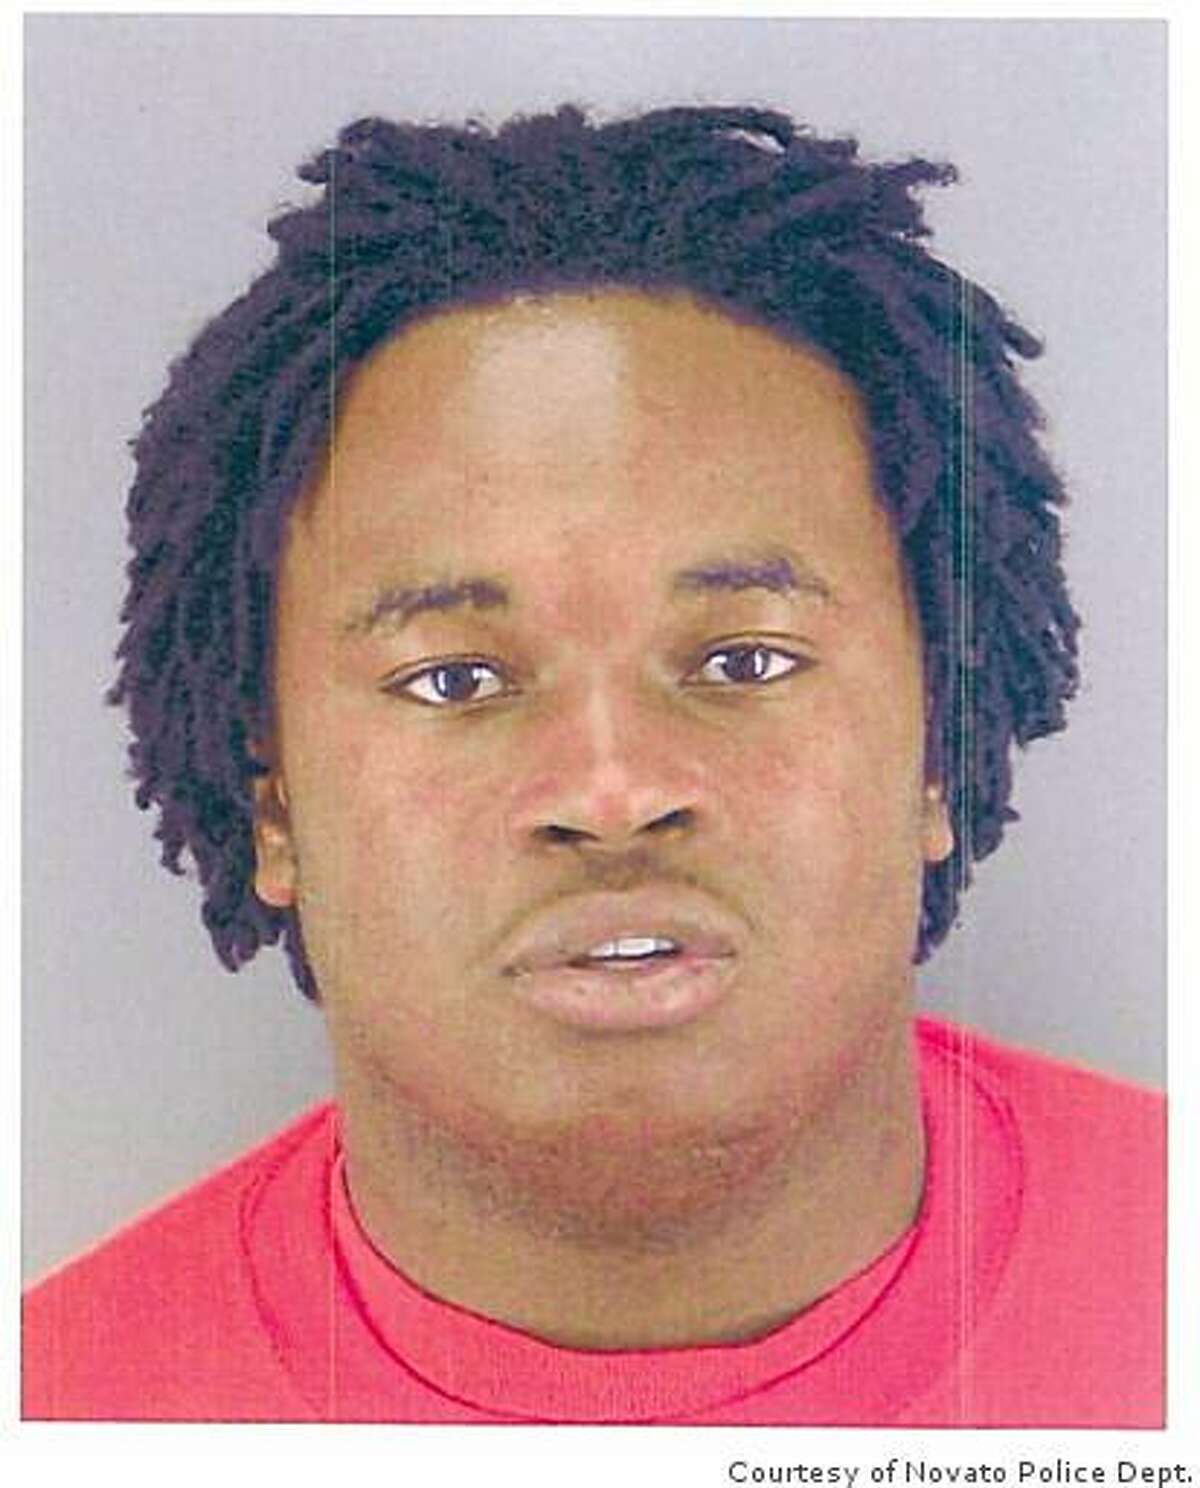 Sean Washington is one of six defendants charged in connection with the murder of Tong Van Le, a Novato resident who owned a shop in Bernal Heights.